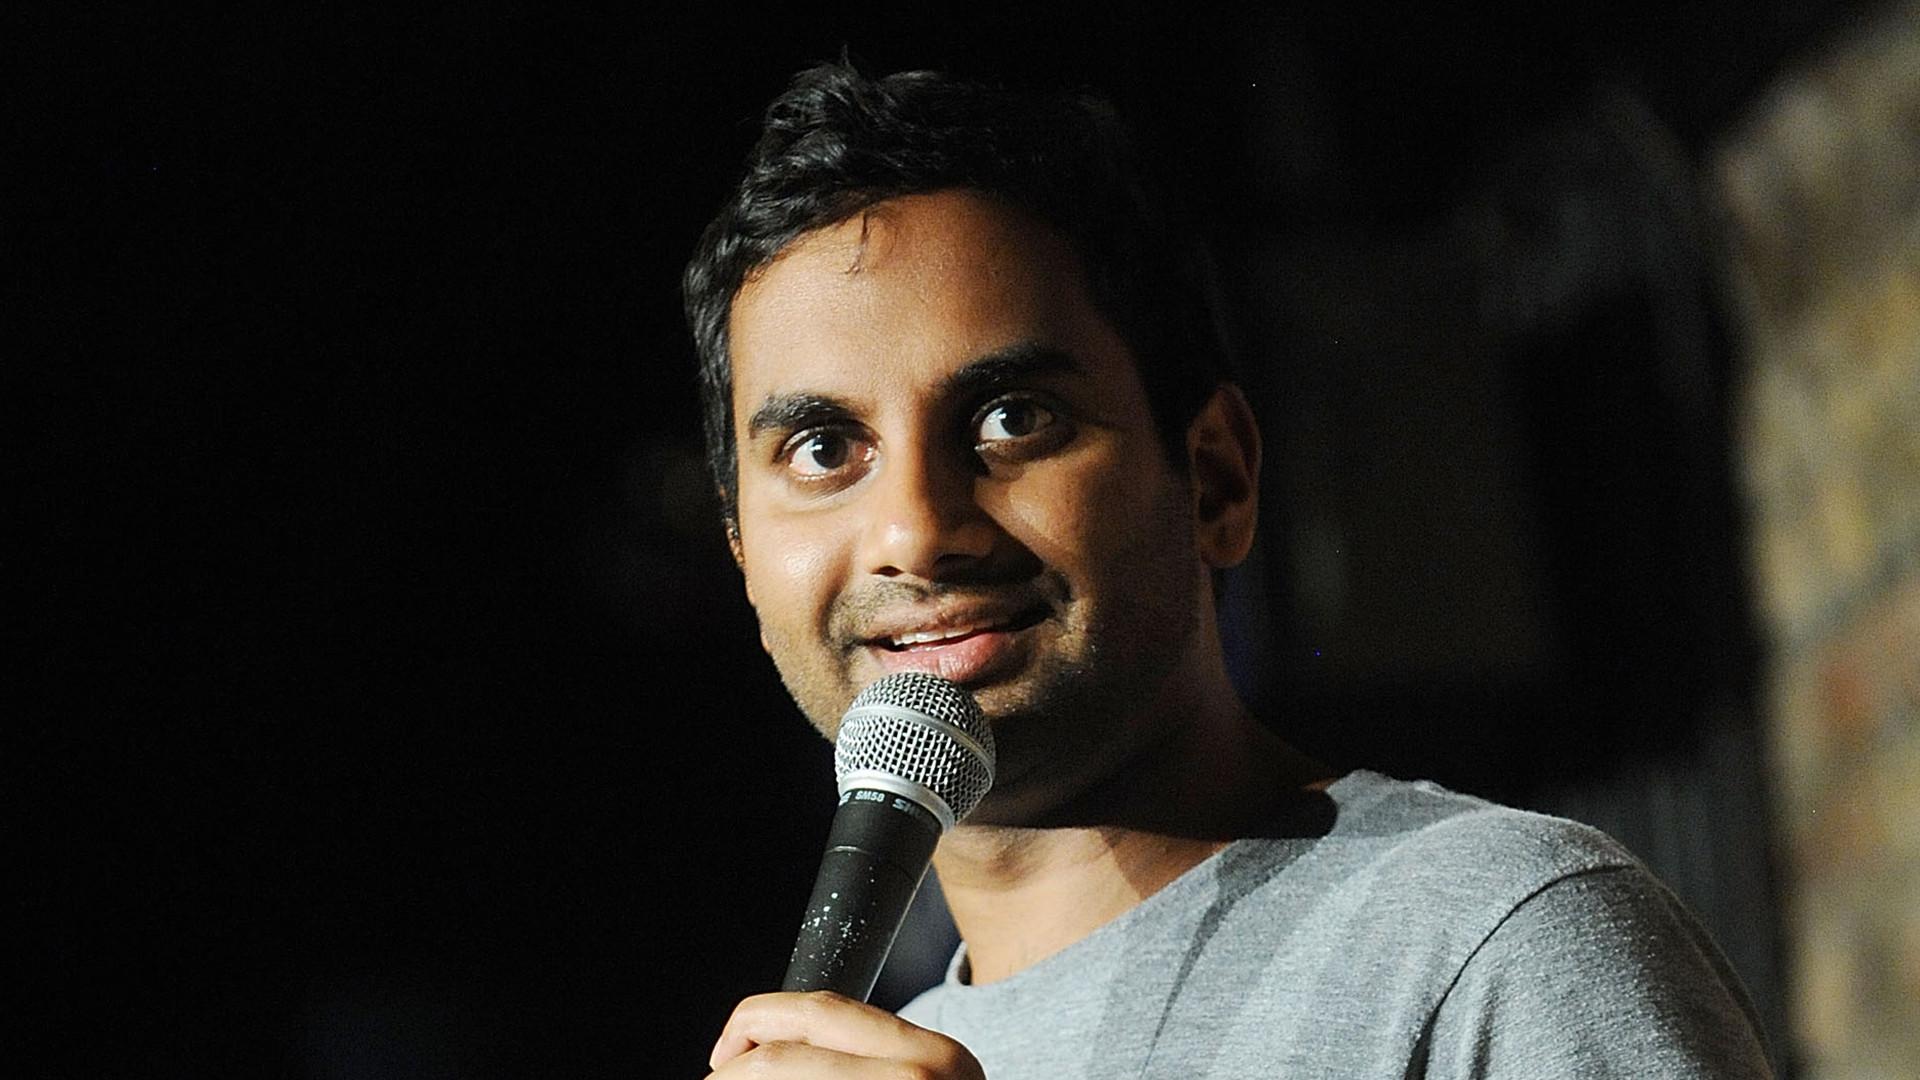 Aziz Ansari Addresses Allegations – but Doesn’t Say Sorry